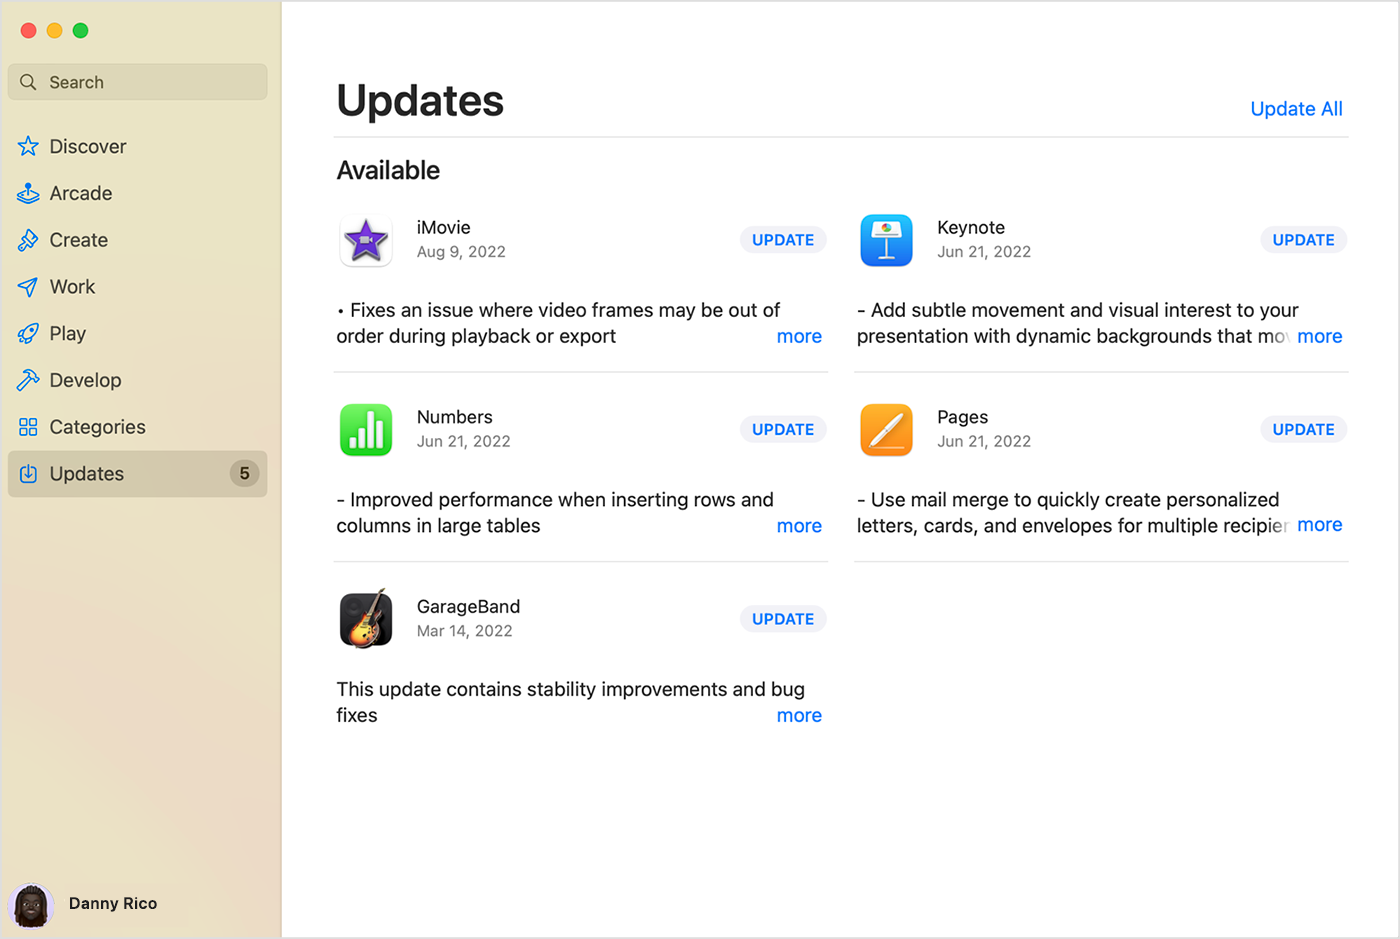 Go to the App Store.
Select Updates.